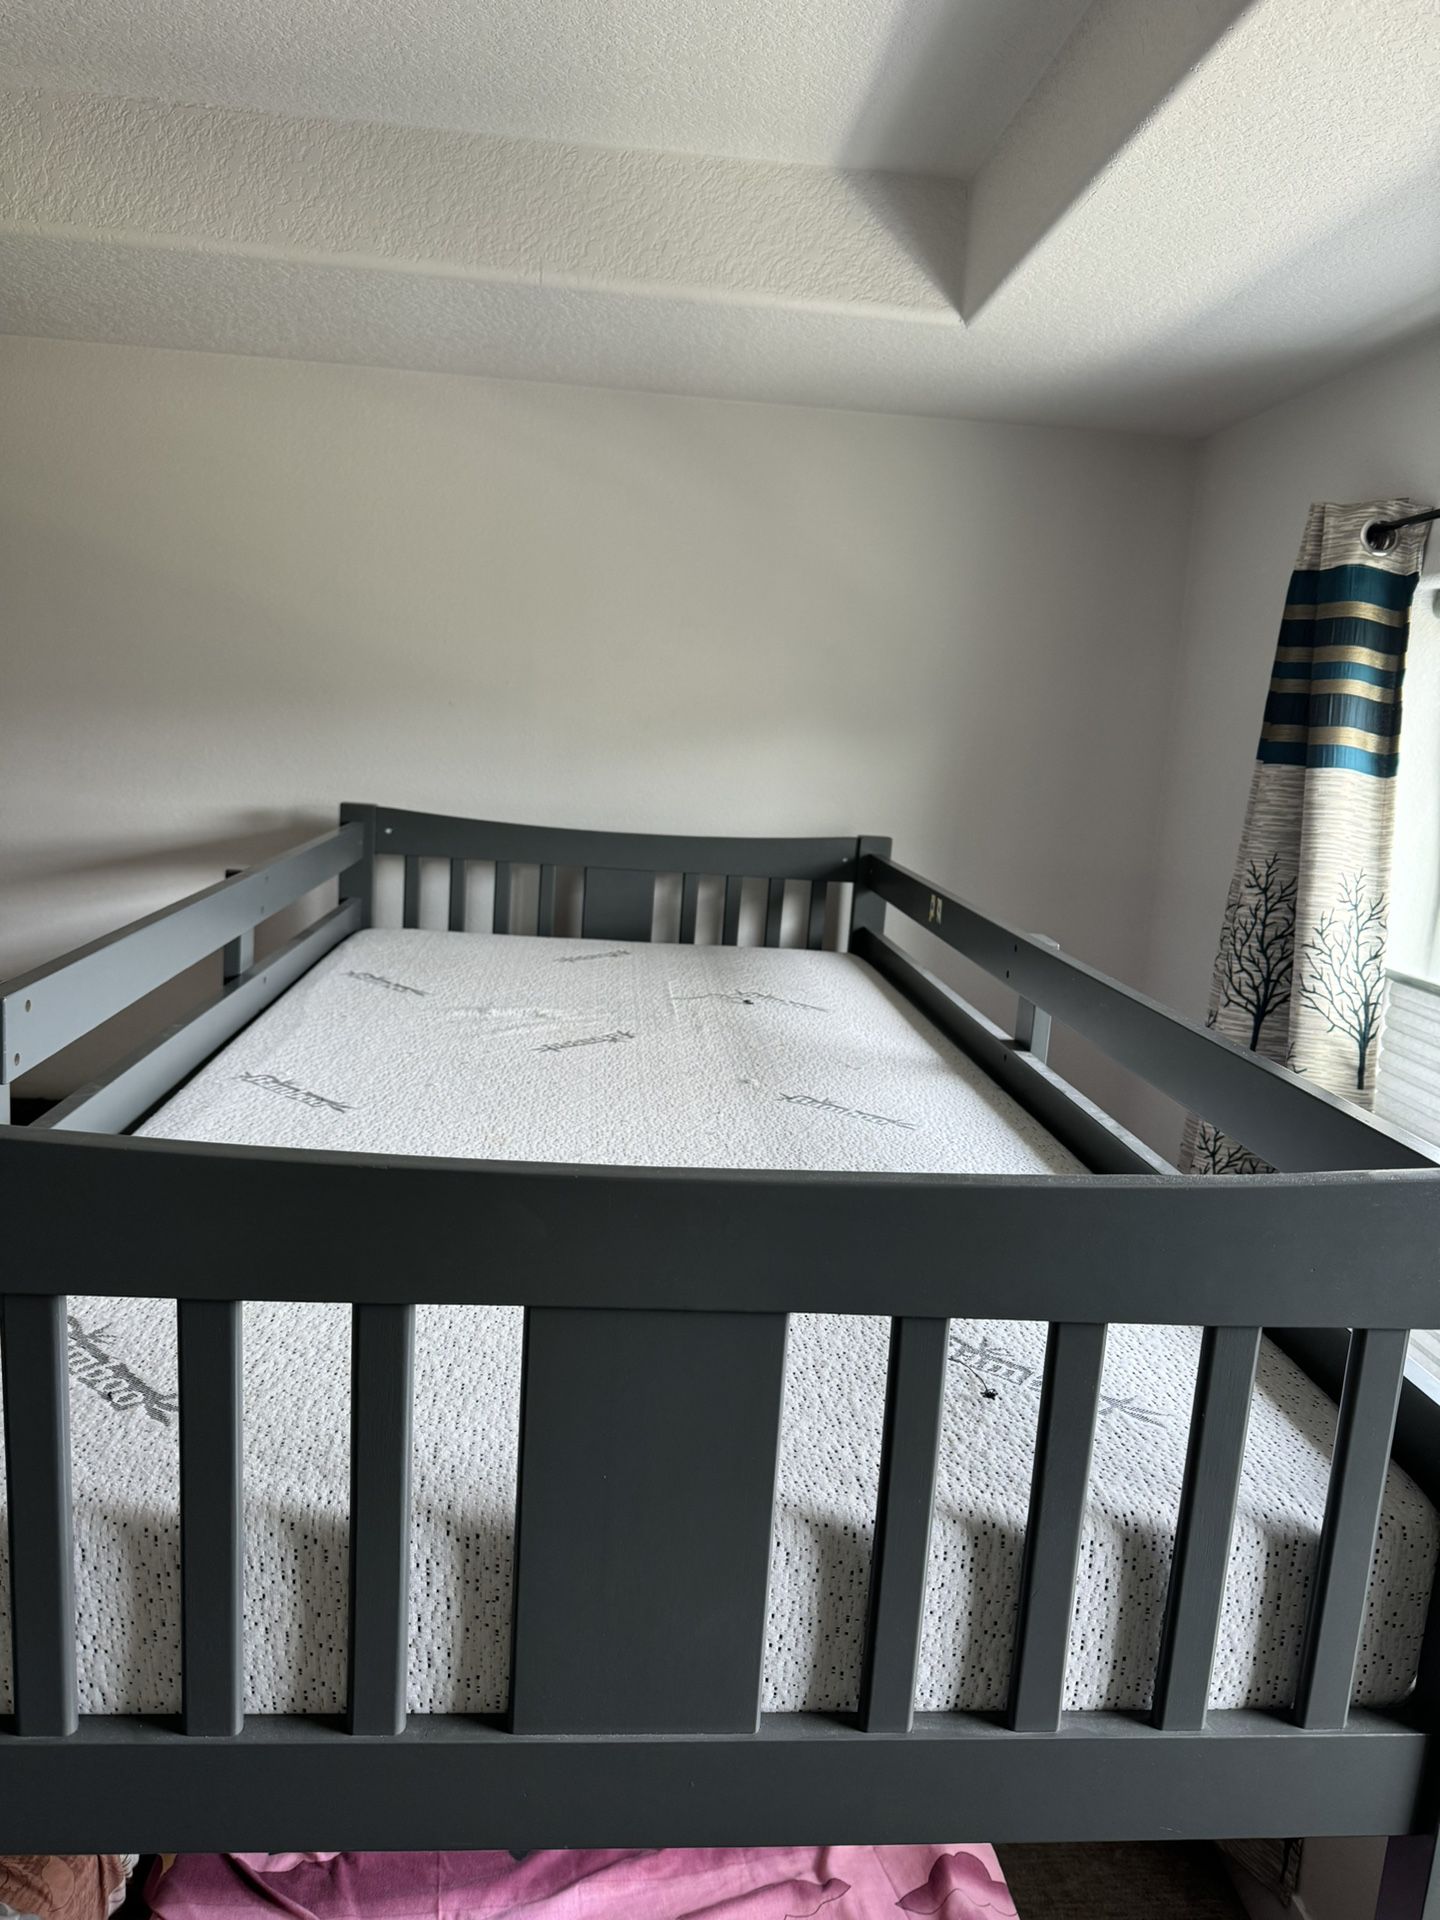 Top Bed Of Twin Size Bunk Bed 